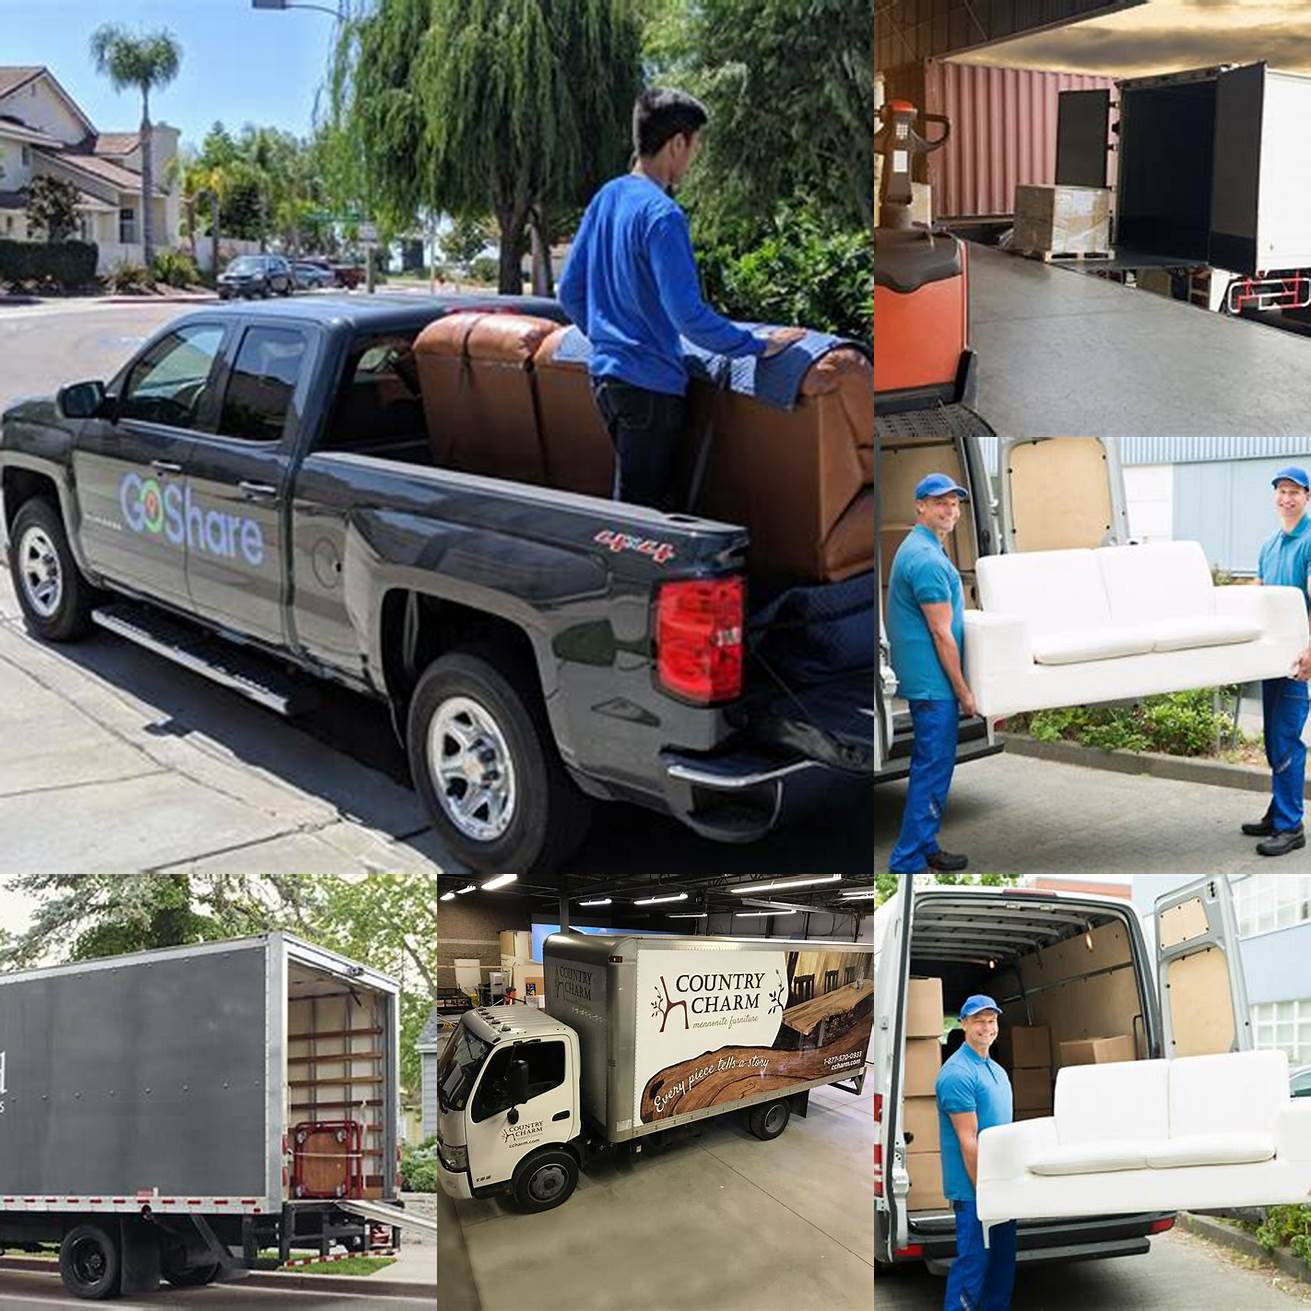 A truck delivering the furniture to its destination